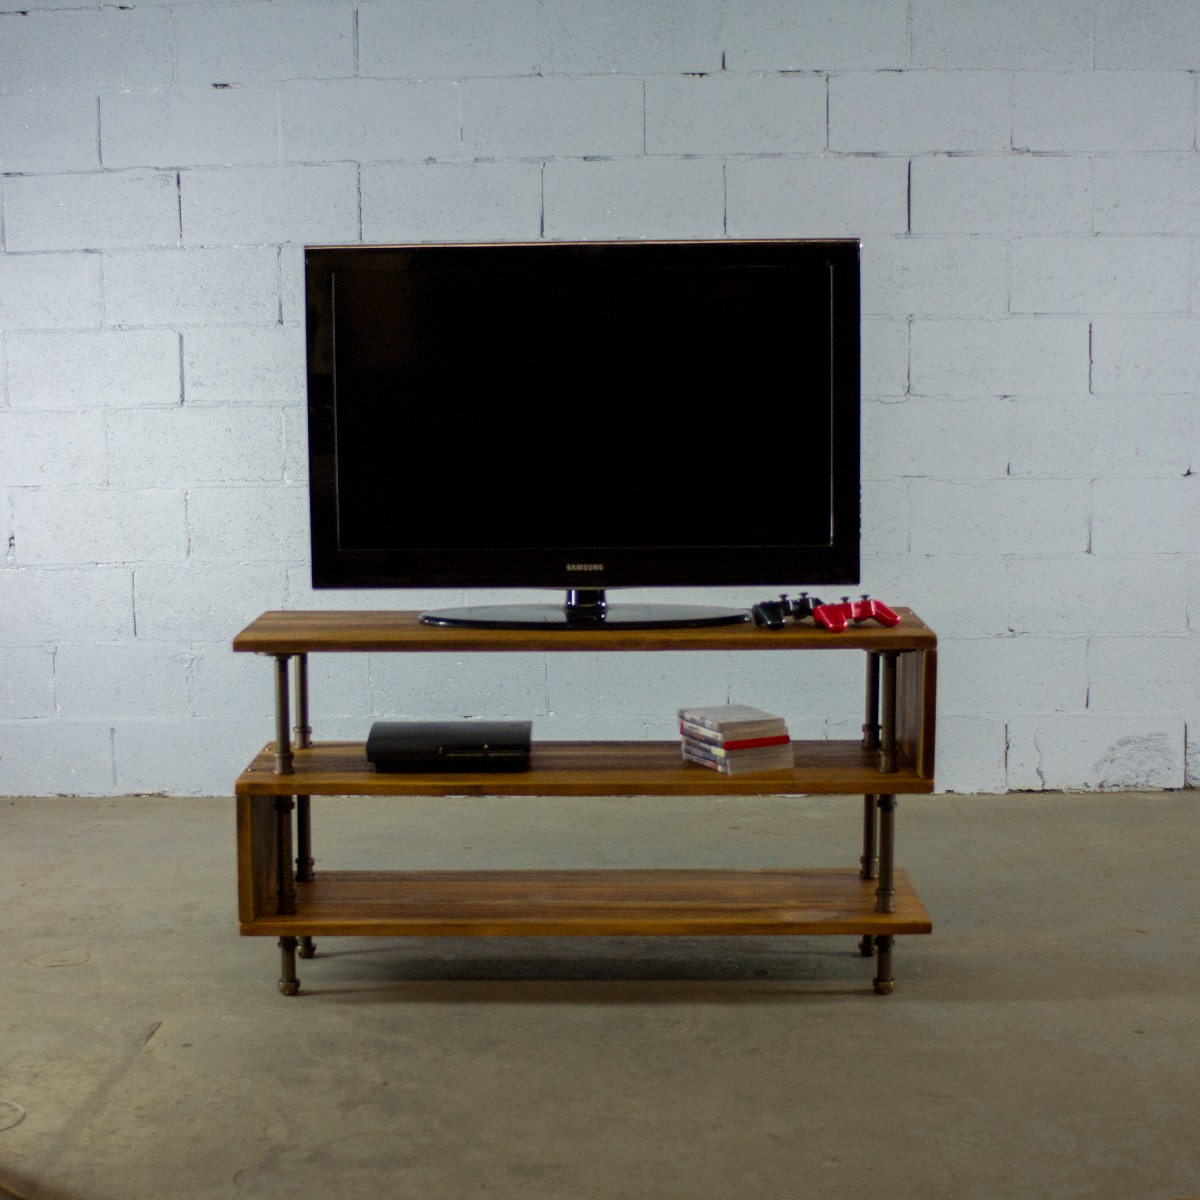 Tvs1-bz-bz-br Tucson Modern Industrial Tv Stand, Rustic Bronze Combo With Light Brown Stained Wood